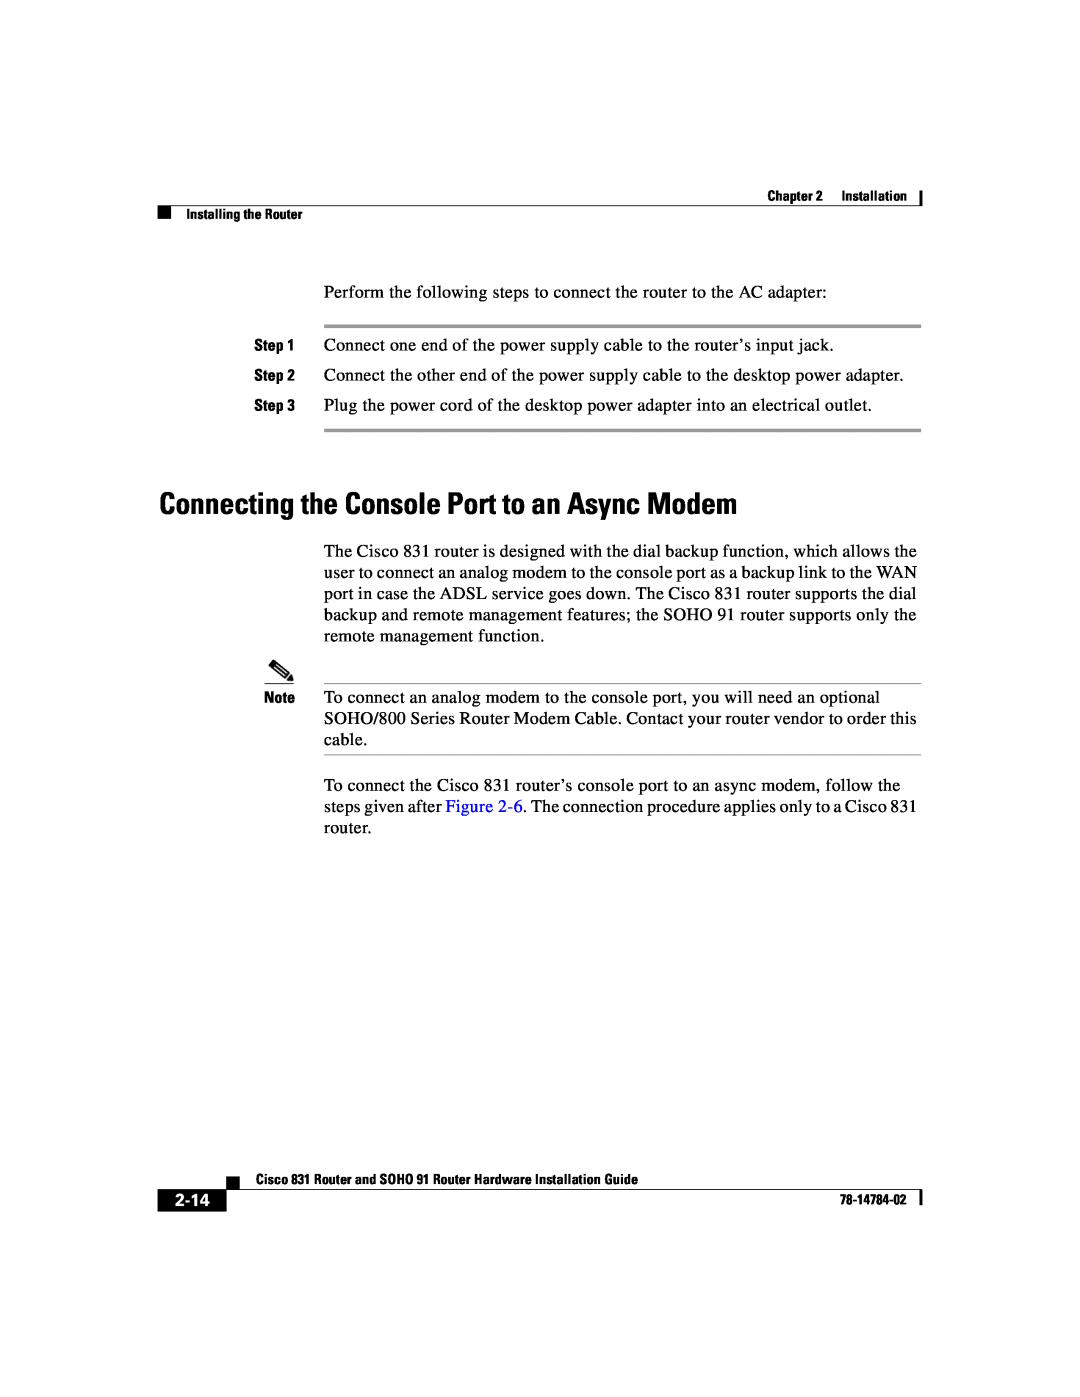 Cisco Systems 78-14784-02 manual Connecting the Console Port to an Async Modem, 2-14 